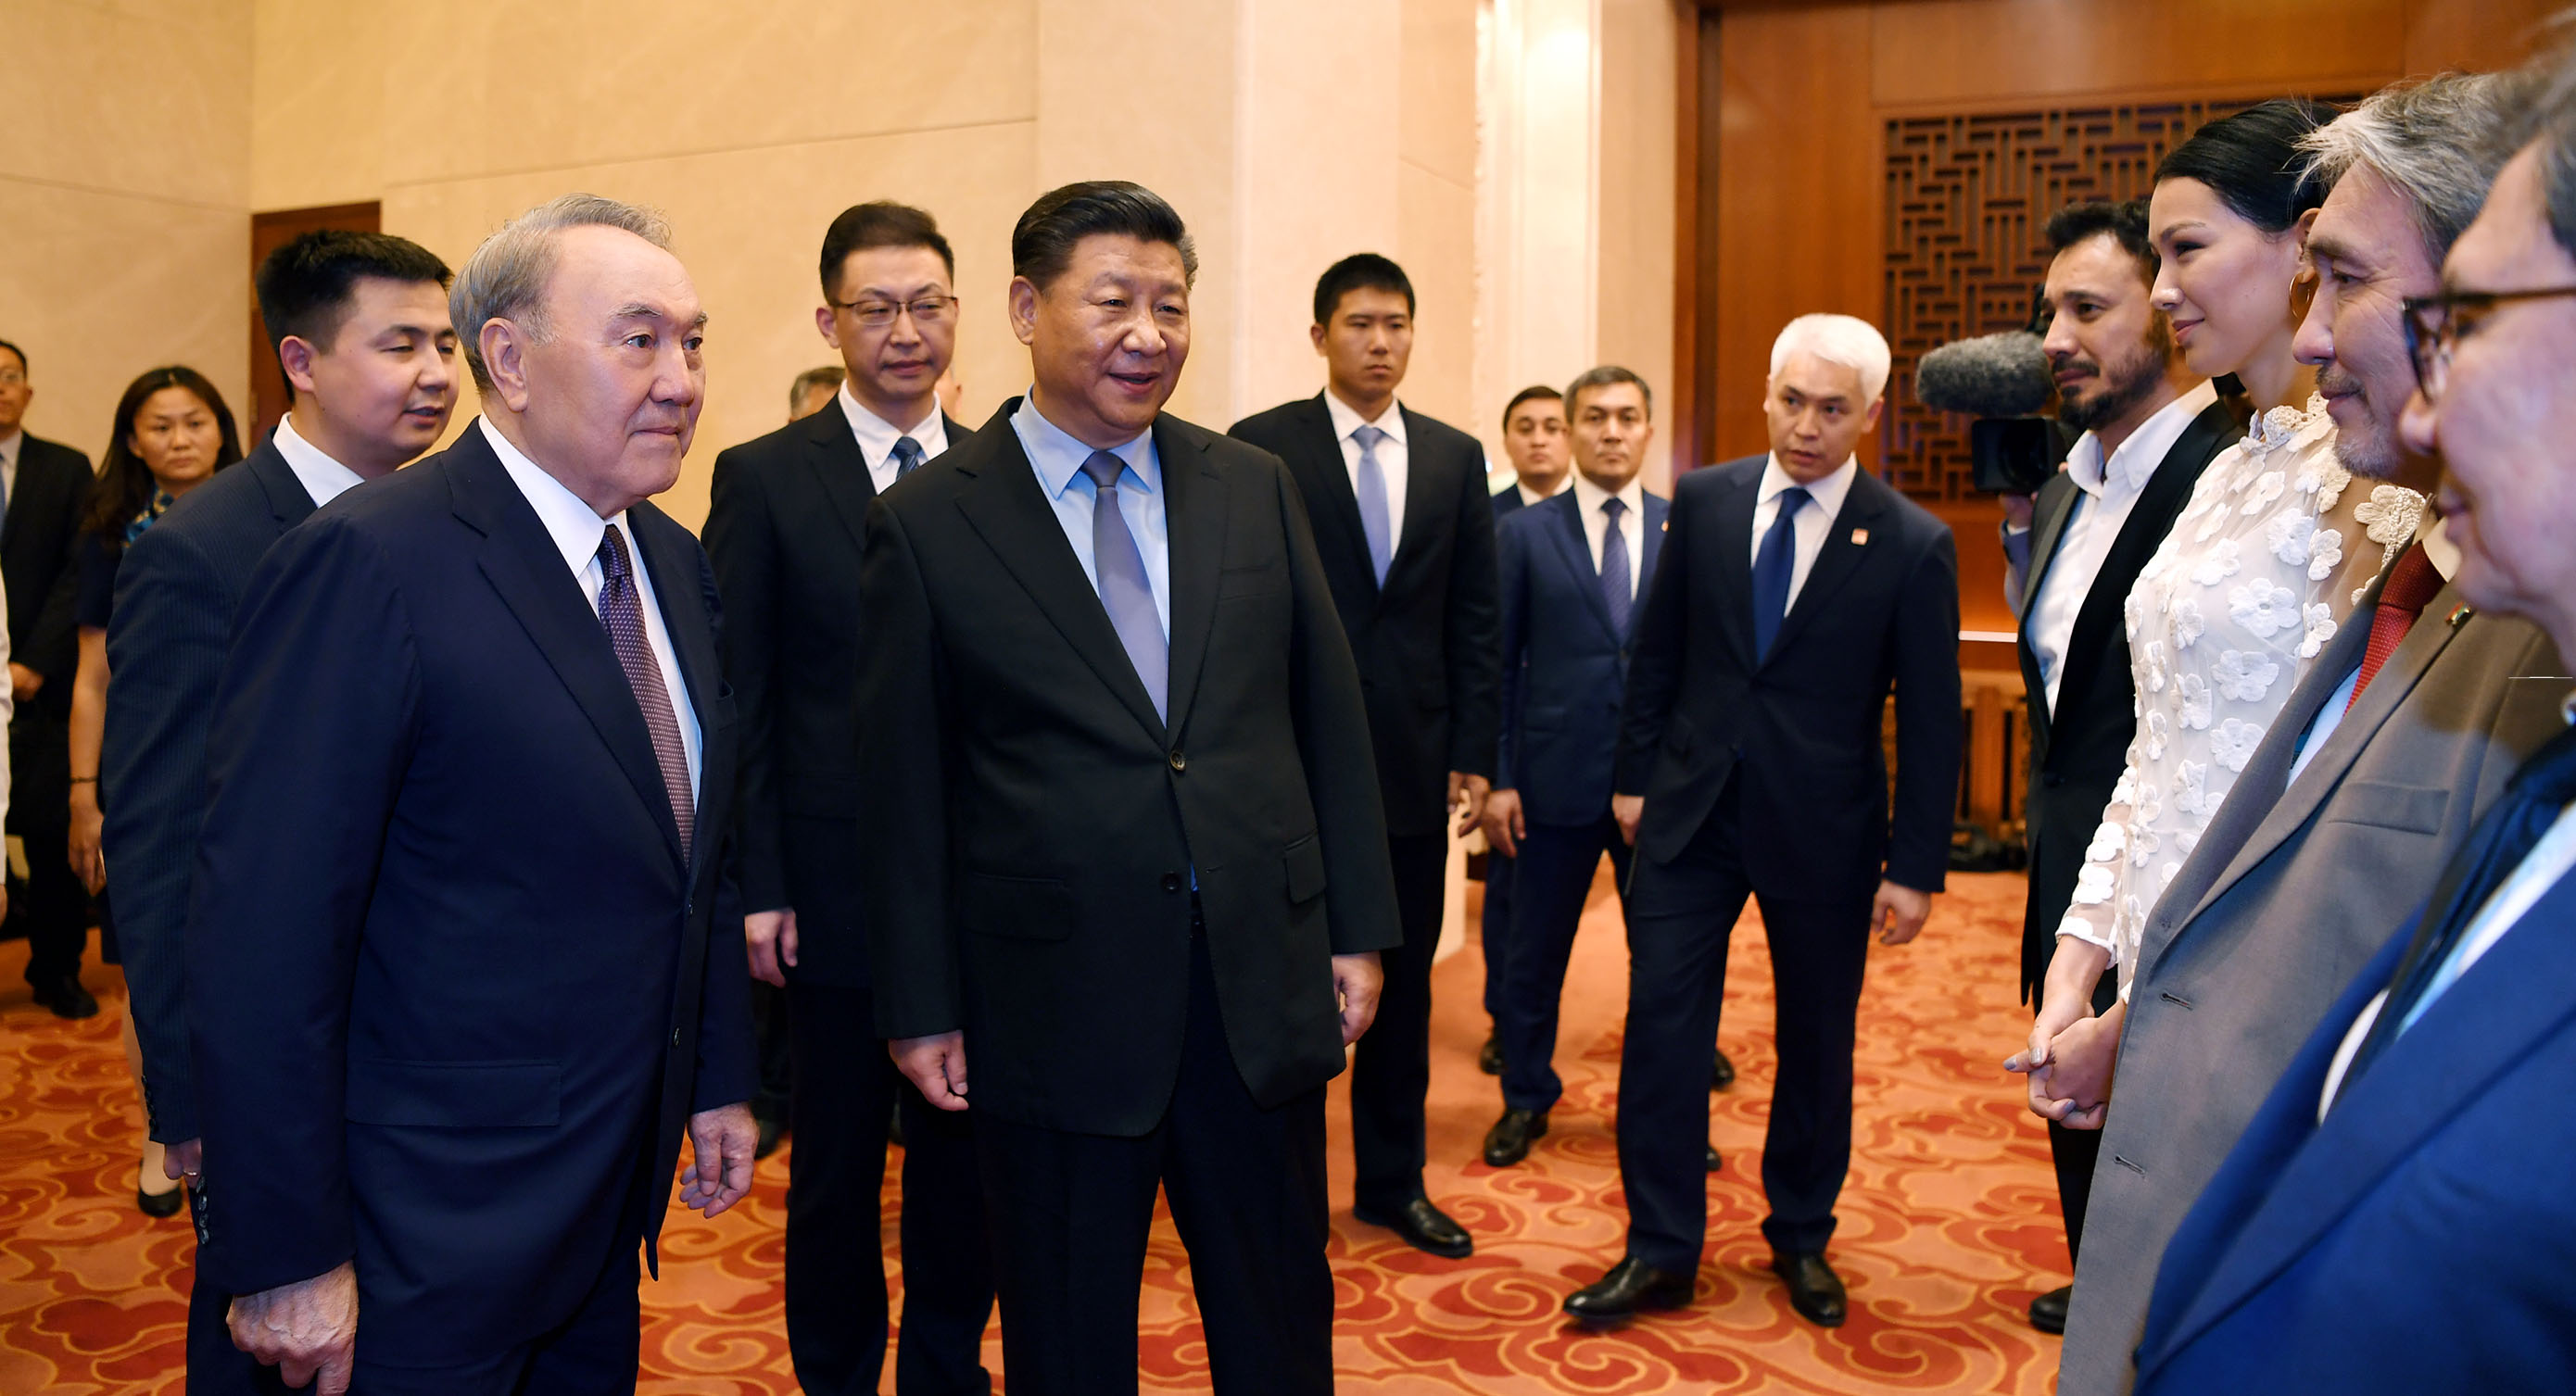 Kazakh President meets with the actors of Composer film